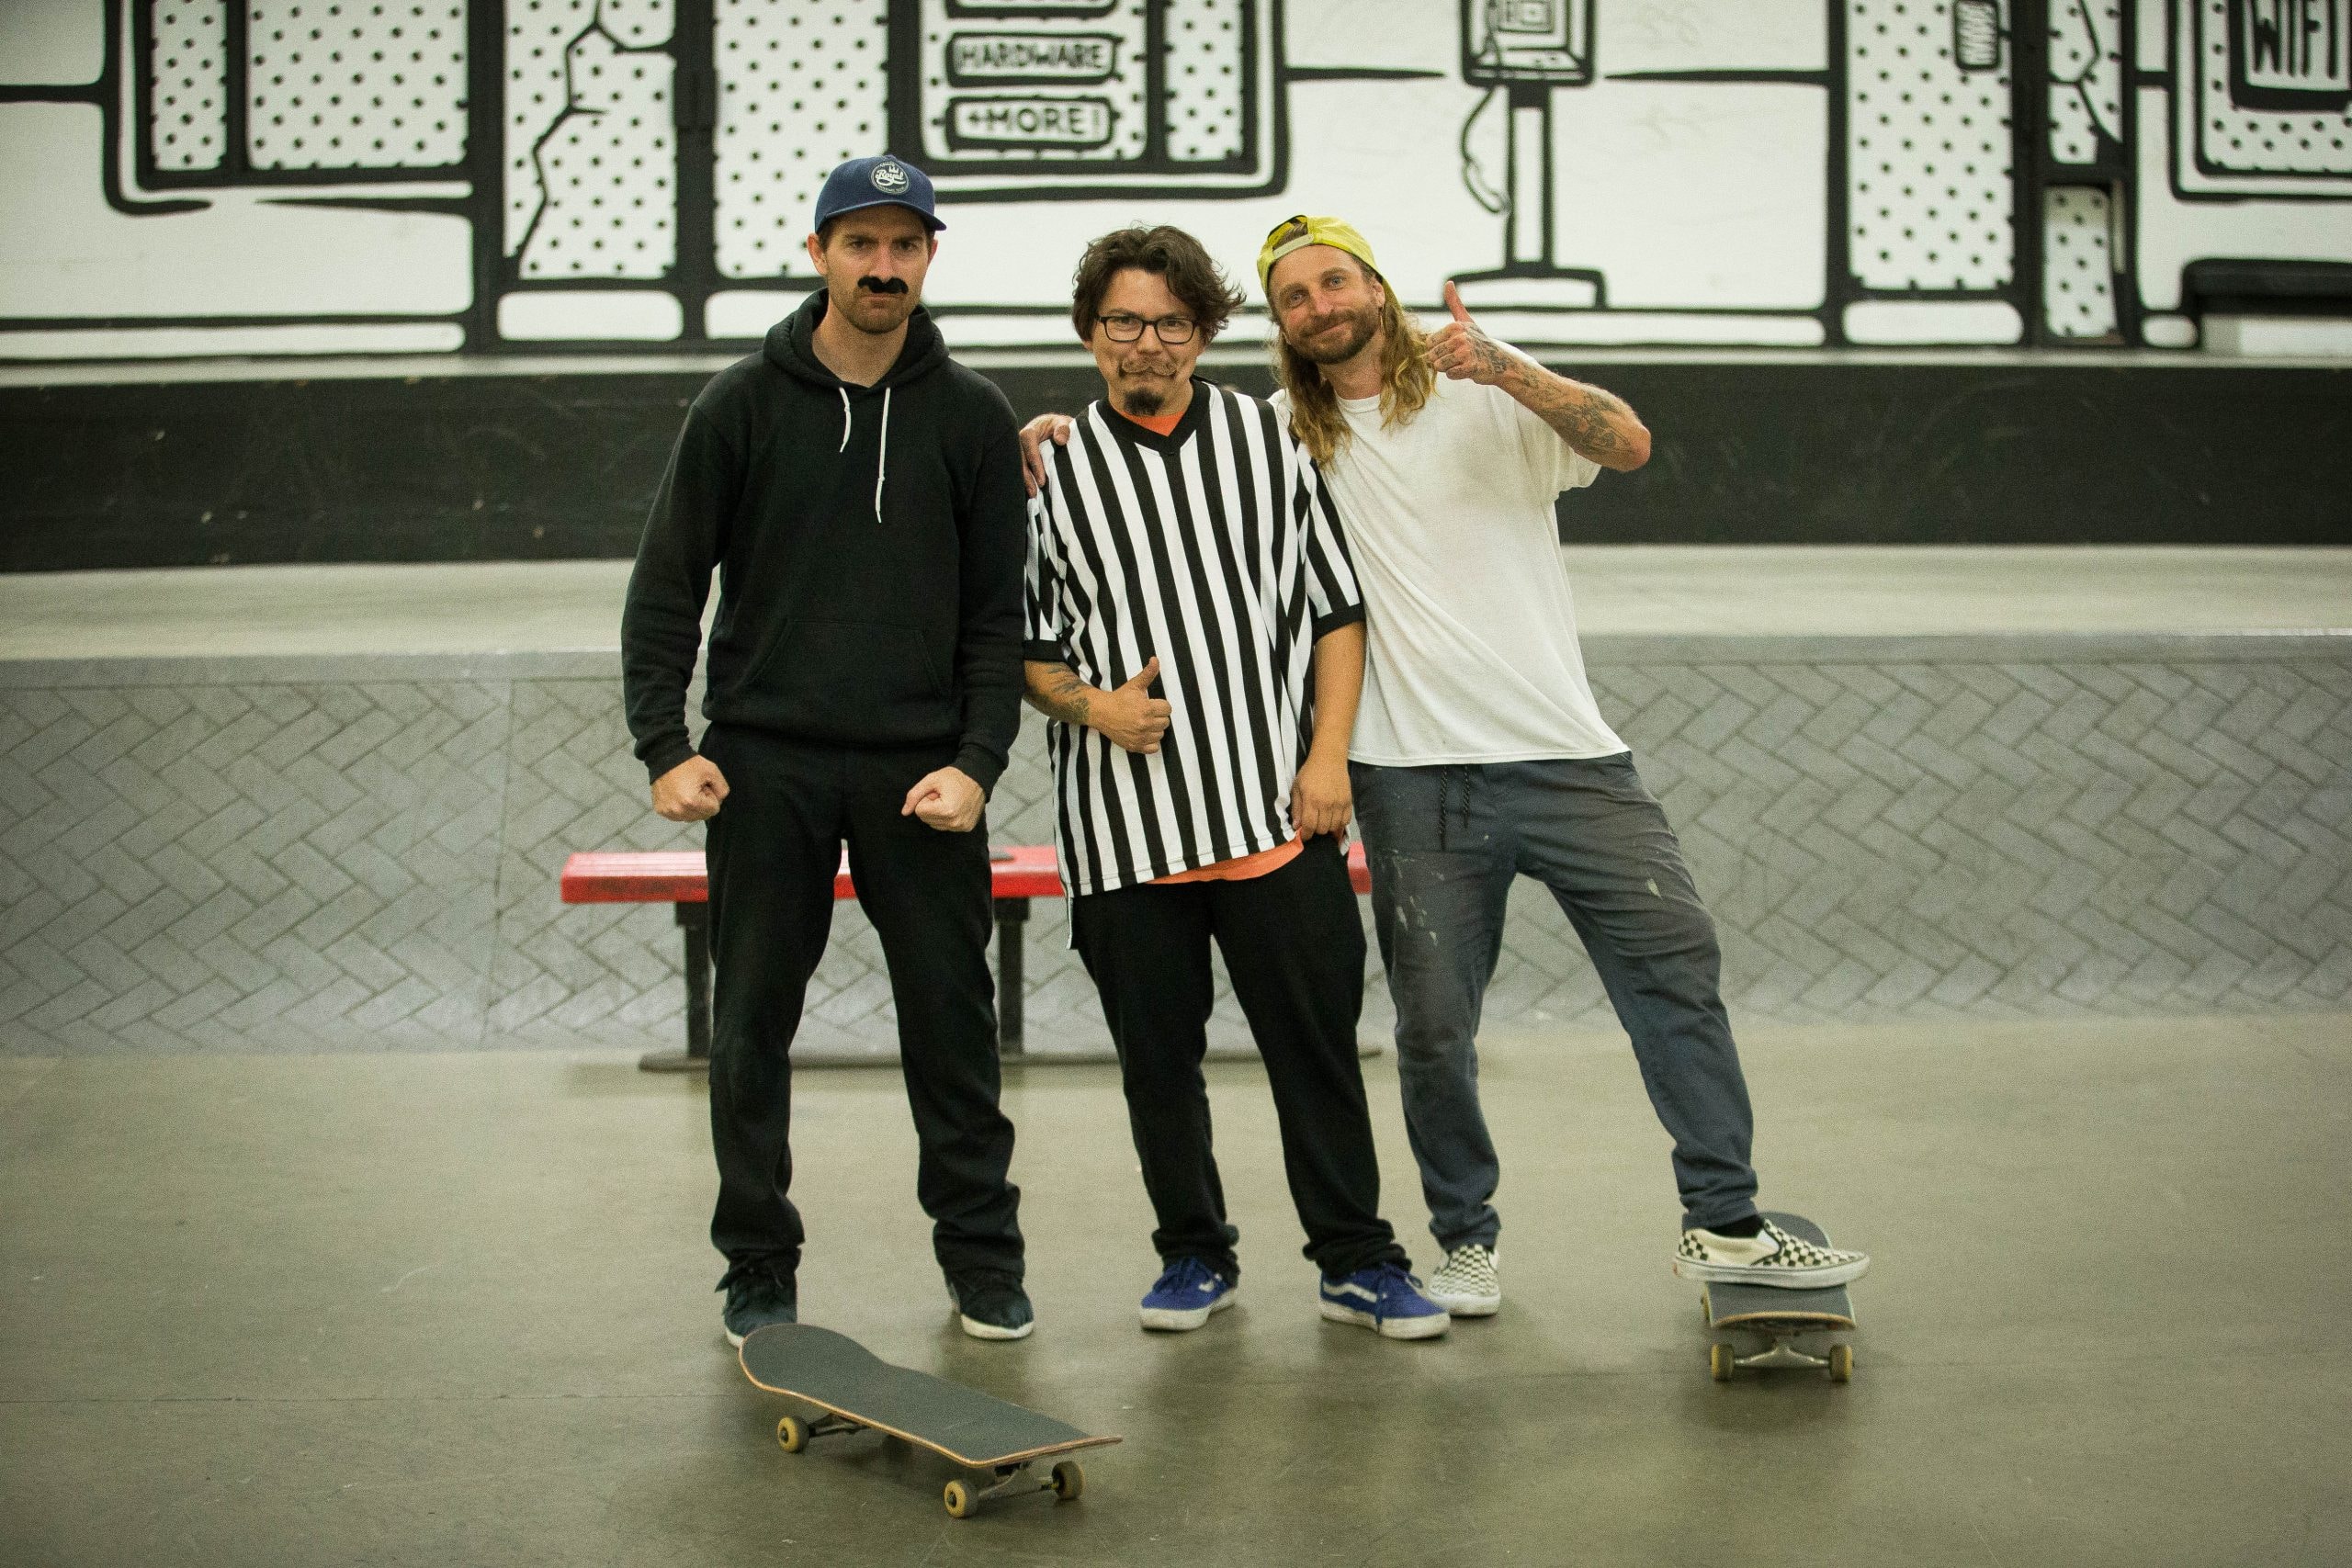 BATB 12 Yoonivision: Tommy To Calapido Vs. Lizard King